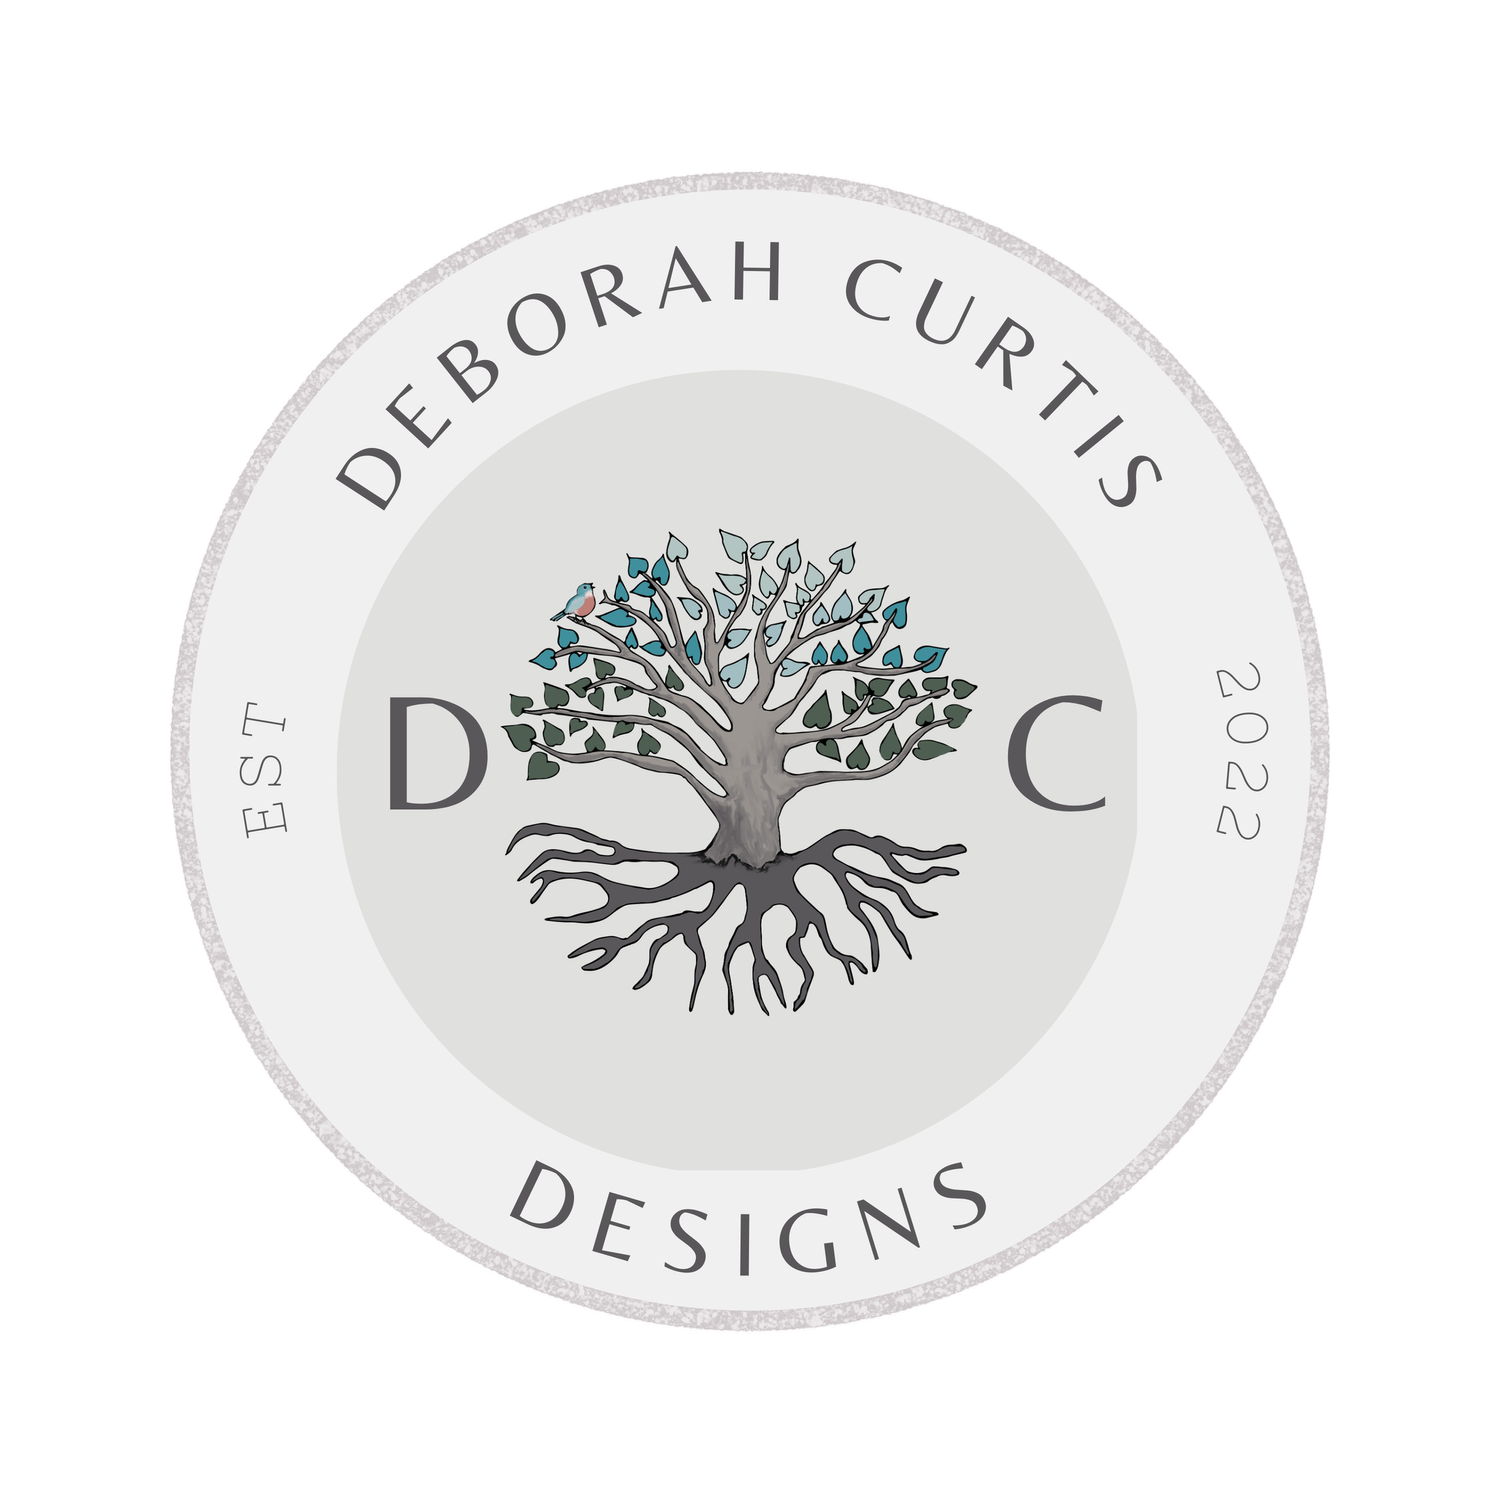 The Official Website of Deborah A. Curtis Designs and Artwork